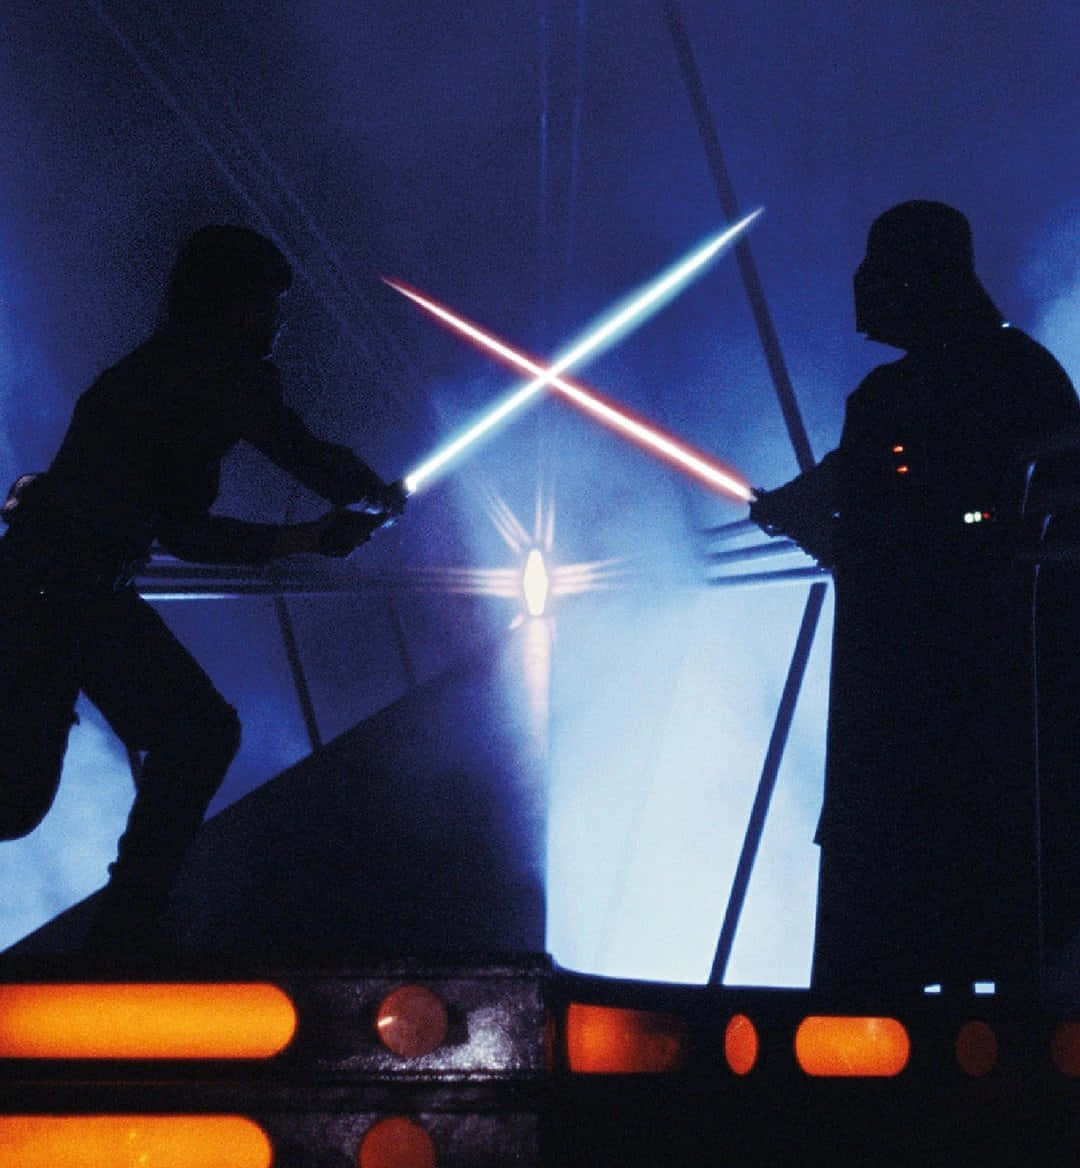 Epic Lightsaber Duel Between Iconic Star Wars Characters Wallpaper